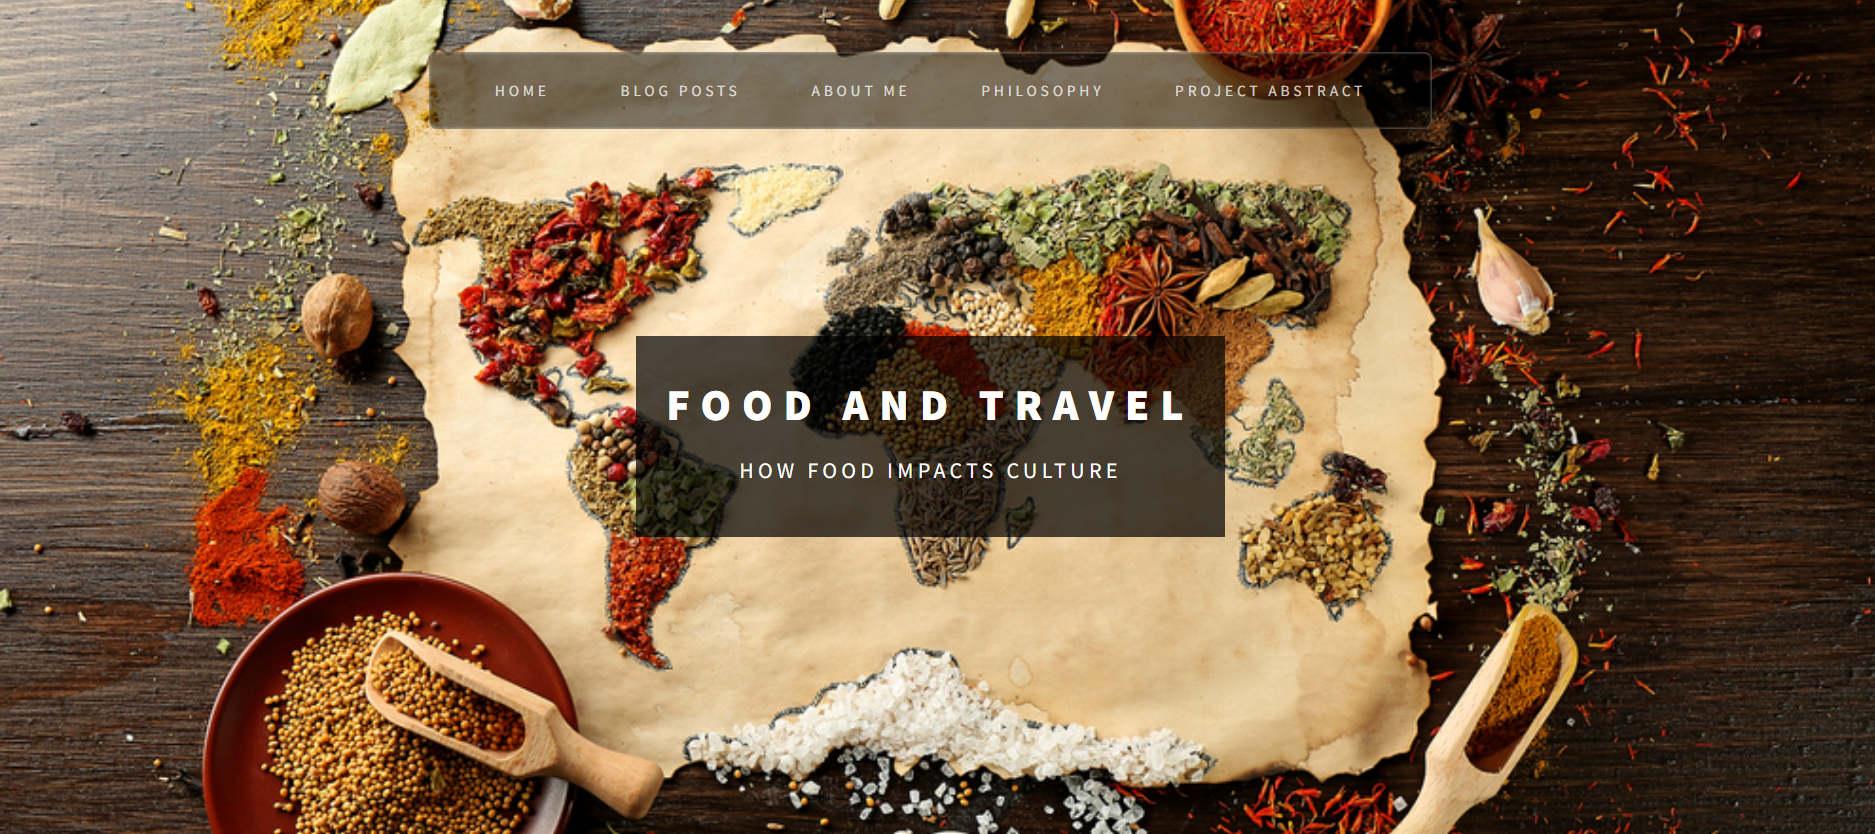 Food and Travel website homepage featuring links to blog posts, about me, philosophy, and project abstract